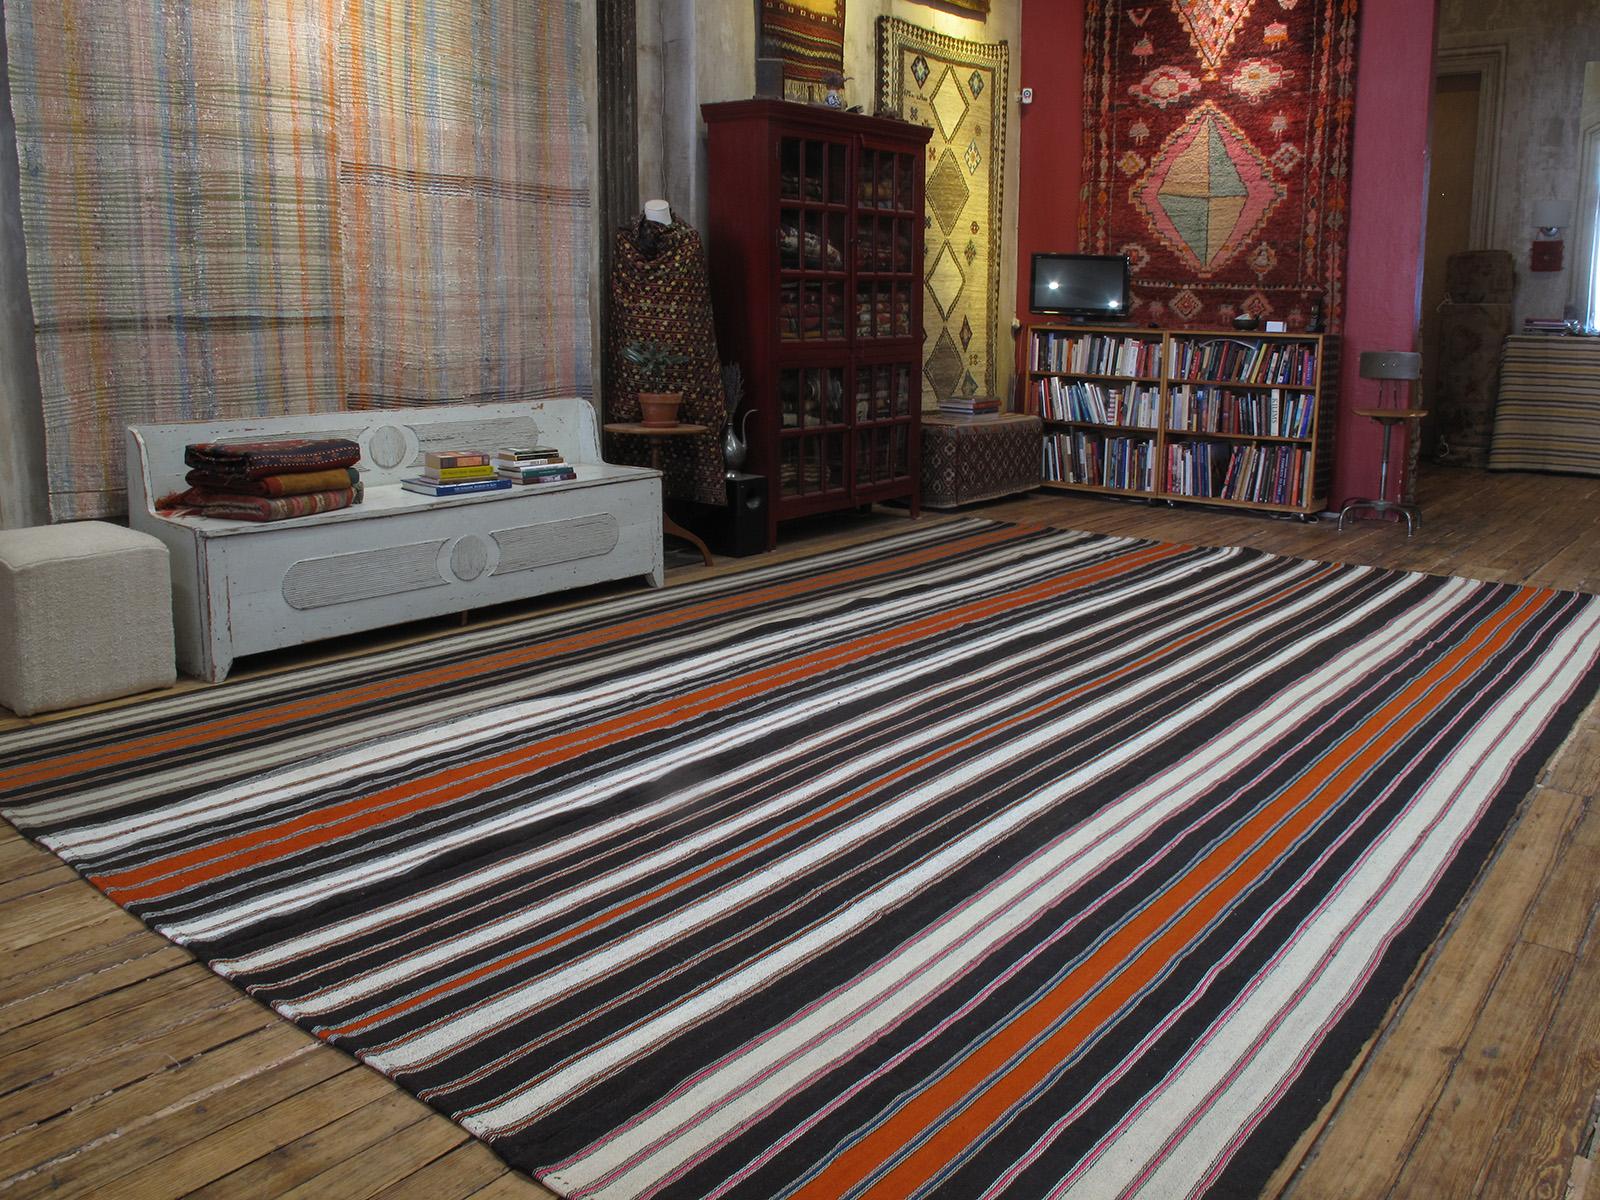 A very large tribal flat-weave from Southeastern Turkey, woven with goat hair in natural tones of dark brown and ivory, in addition to orange, pink and blue. A Kilim like this would have been used as a utilitarian, everyday floor cover in the